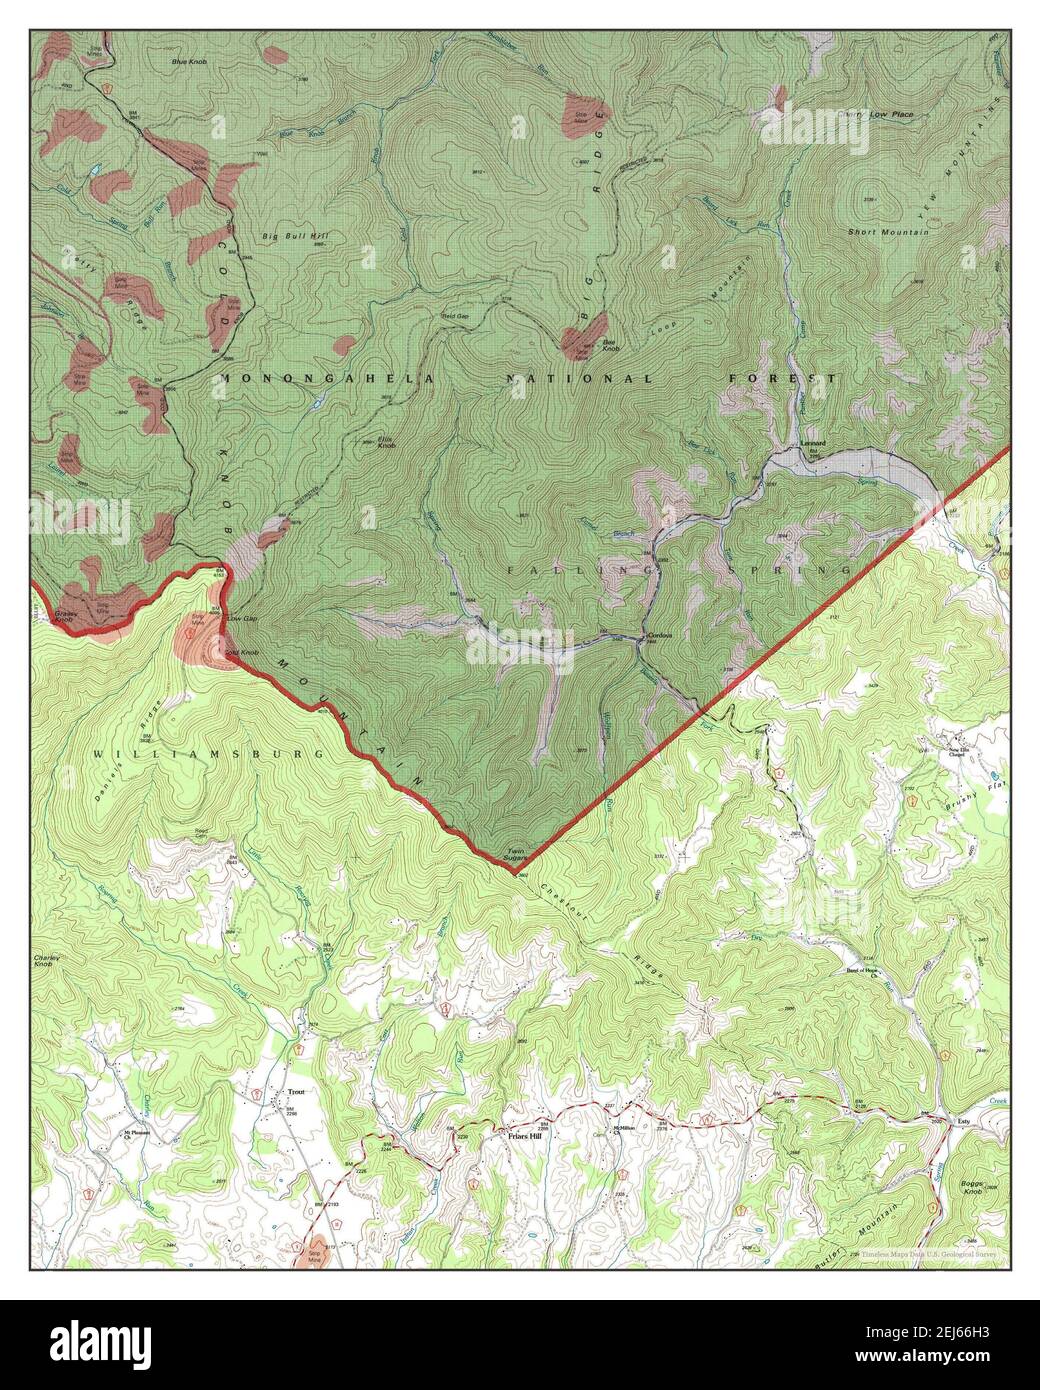 Trout, West Virginia, map 1995, 1:24000, United States of America by Timeless Maps, data U.S. Geological Survey Stock Photo